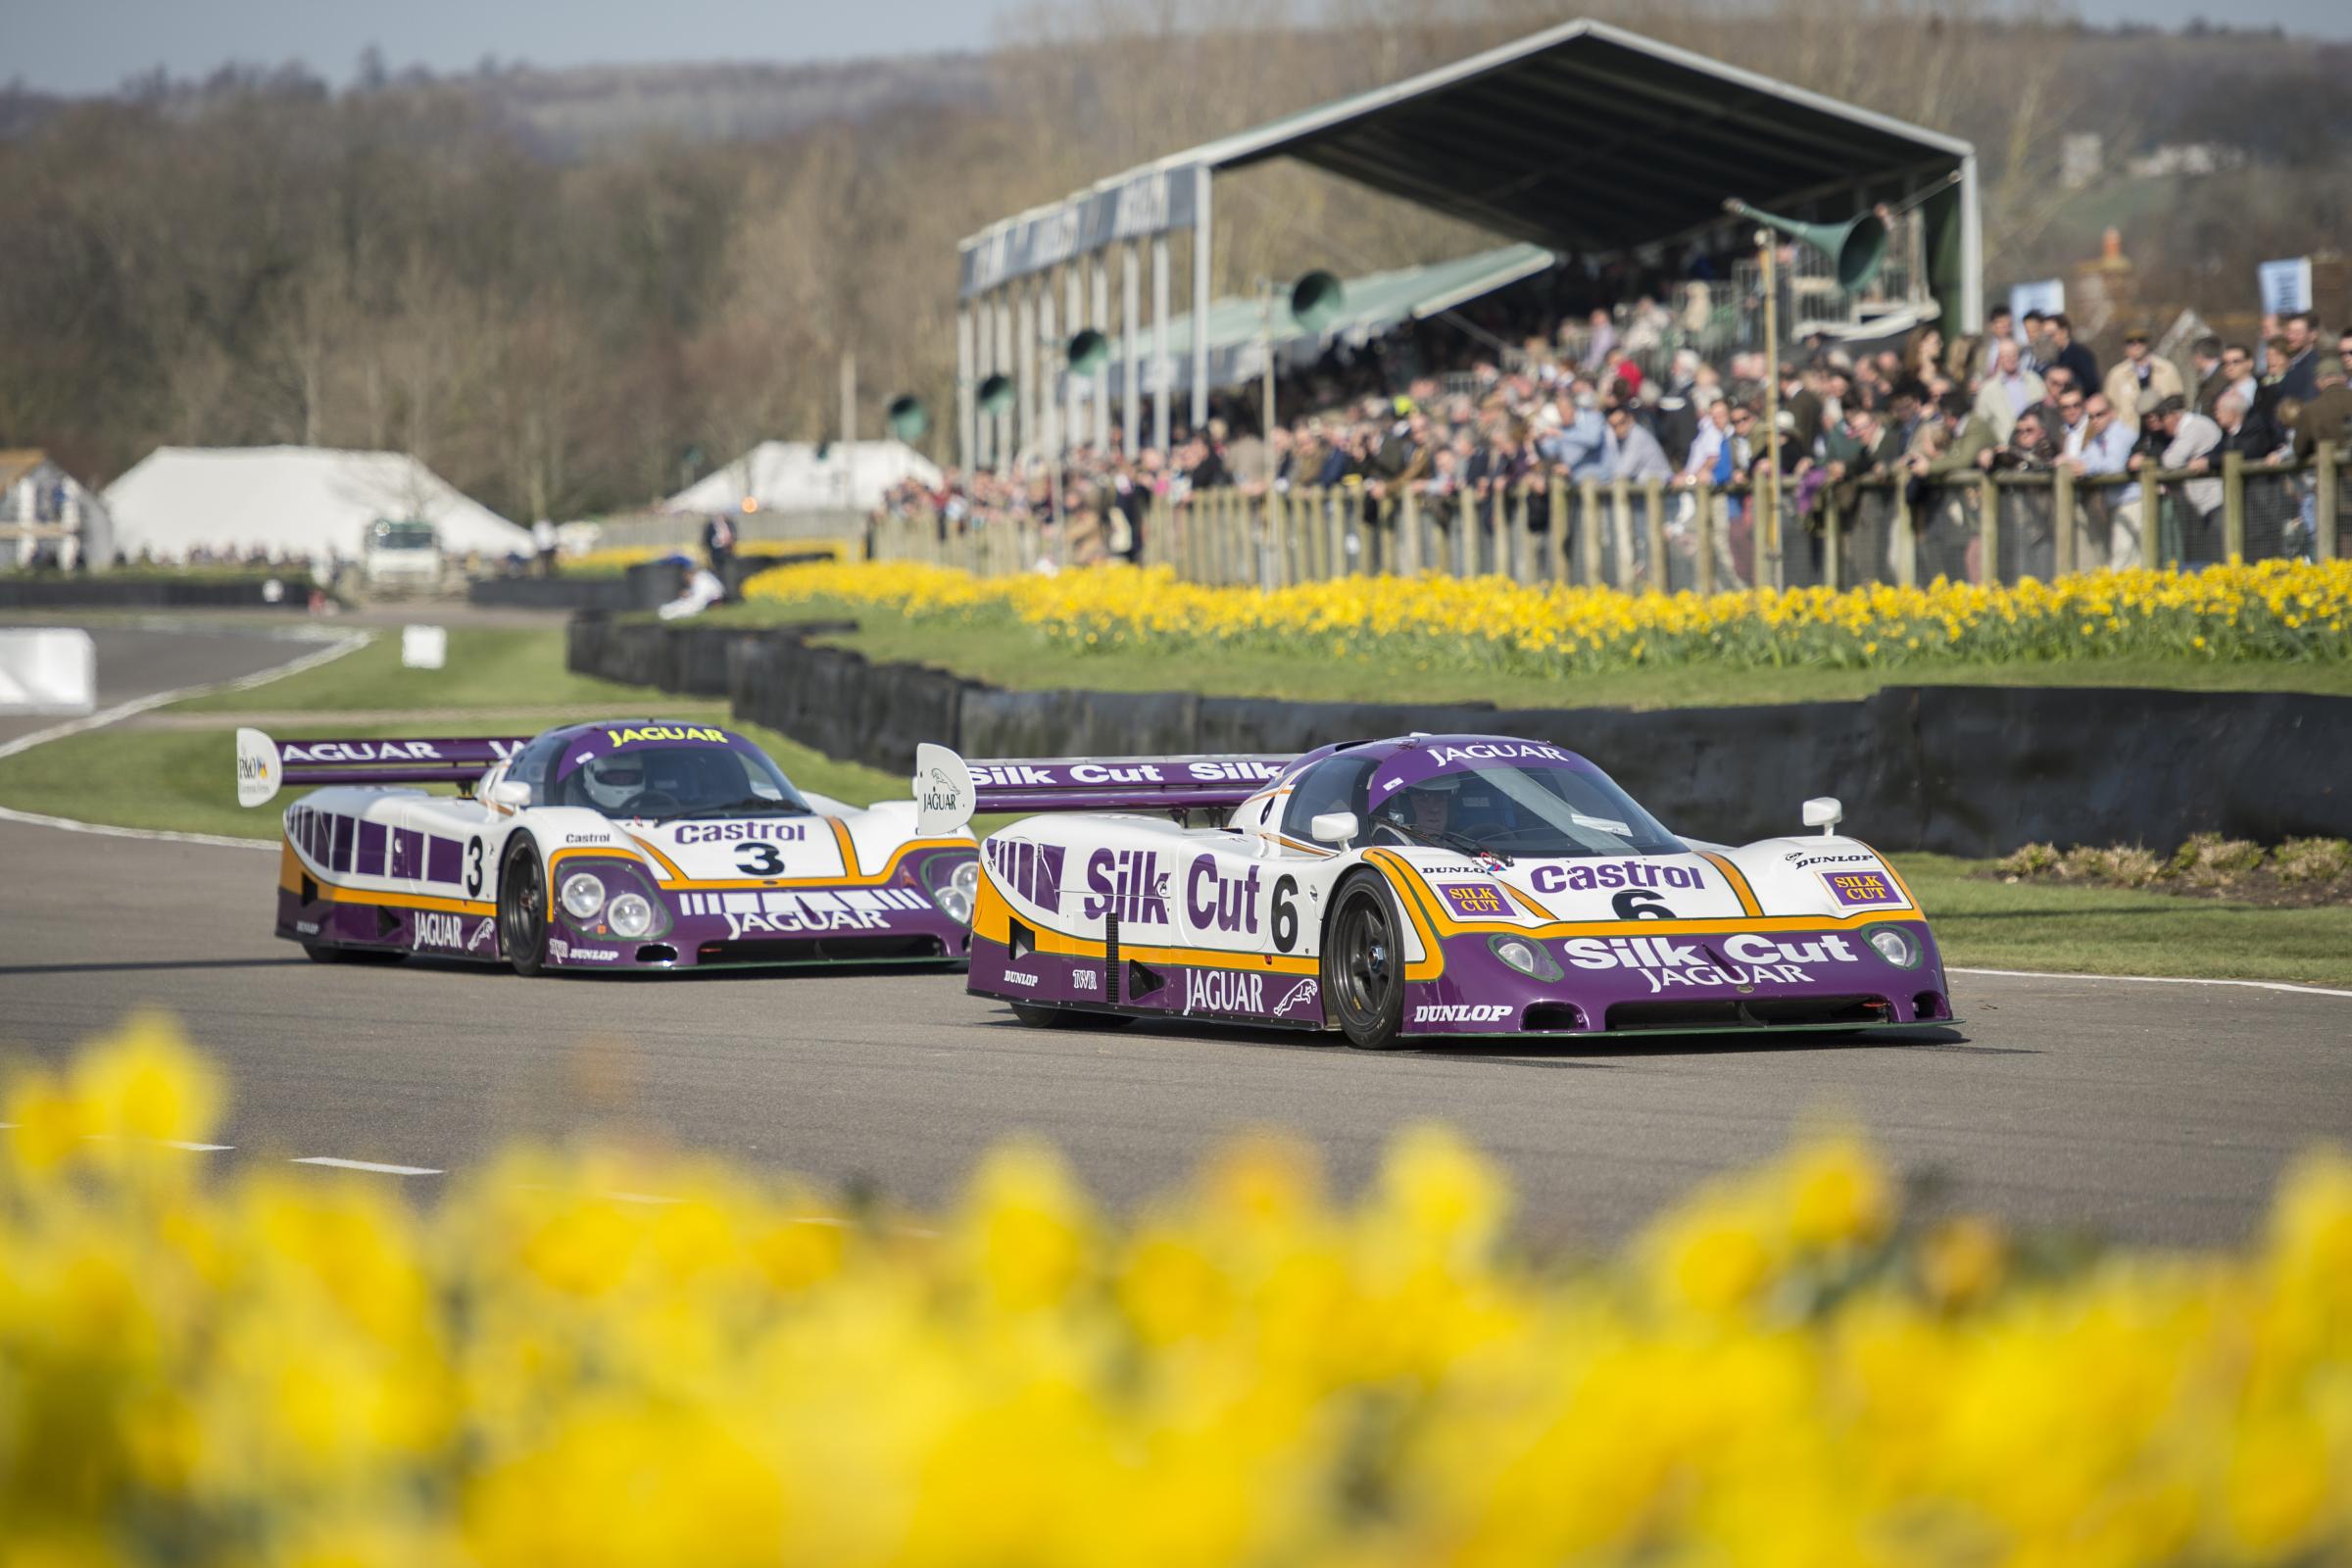 Group C cars to bring Le Mans Fever to Goodwood Members Meeting